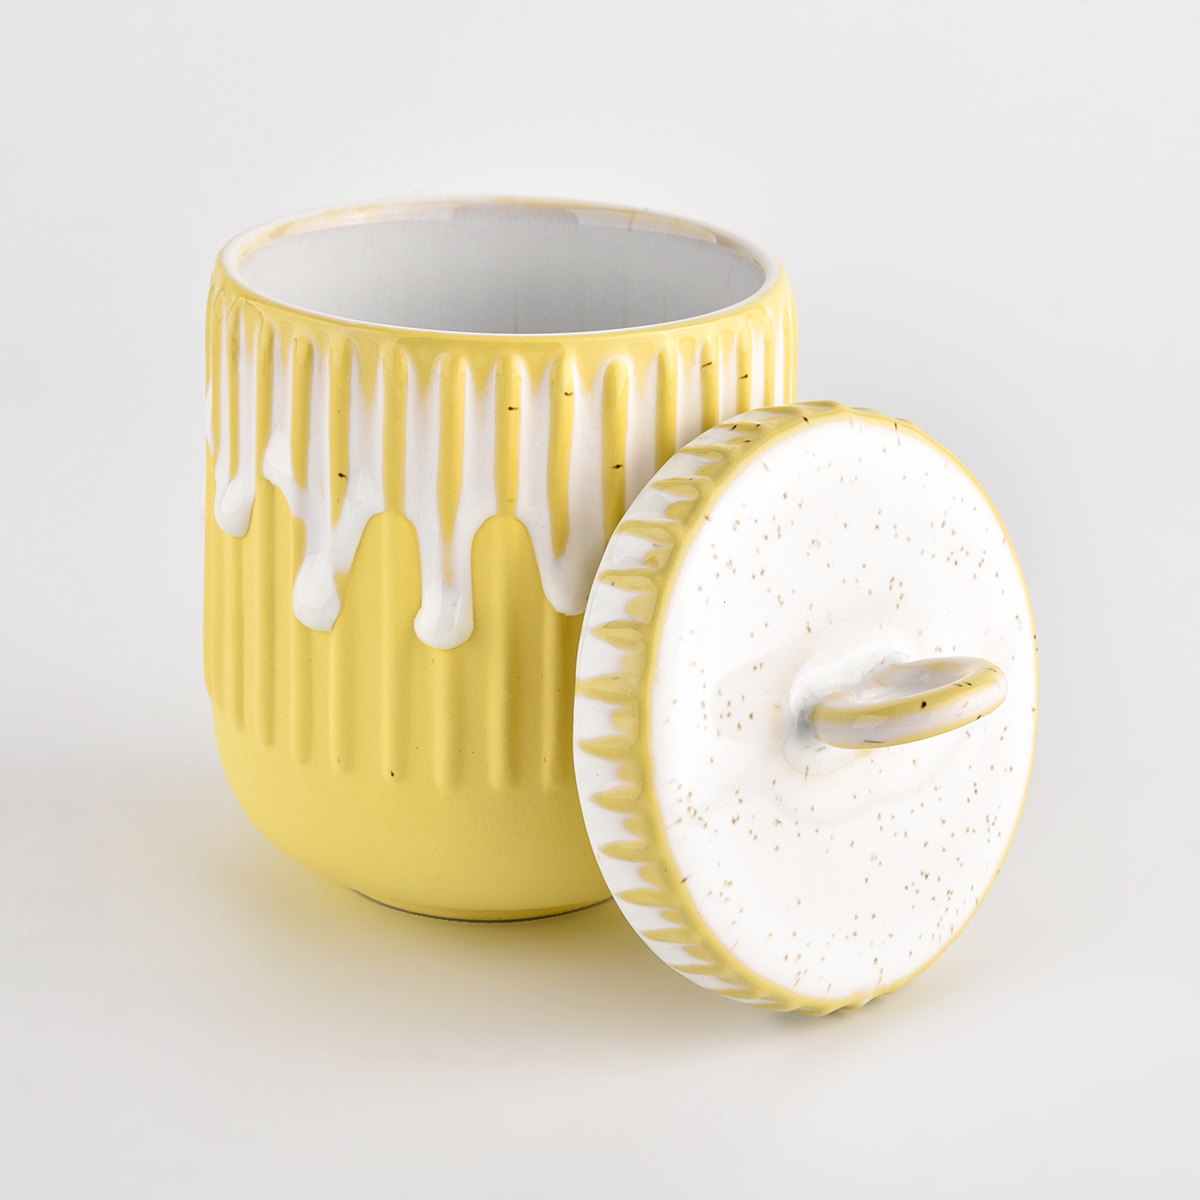 Strip pattern ceramic candle jars with lids from Sunny Glassware